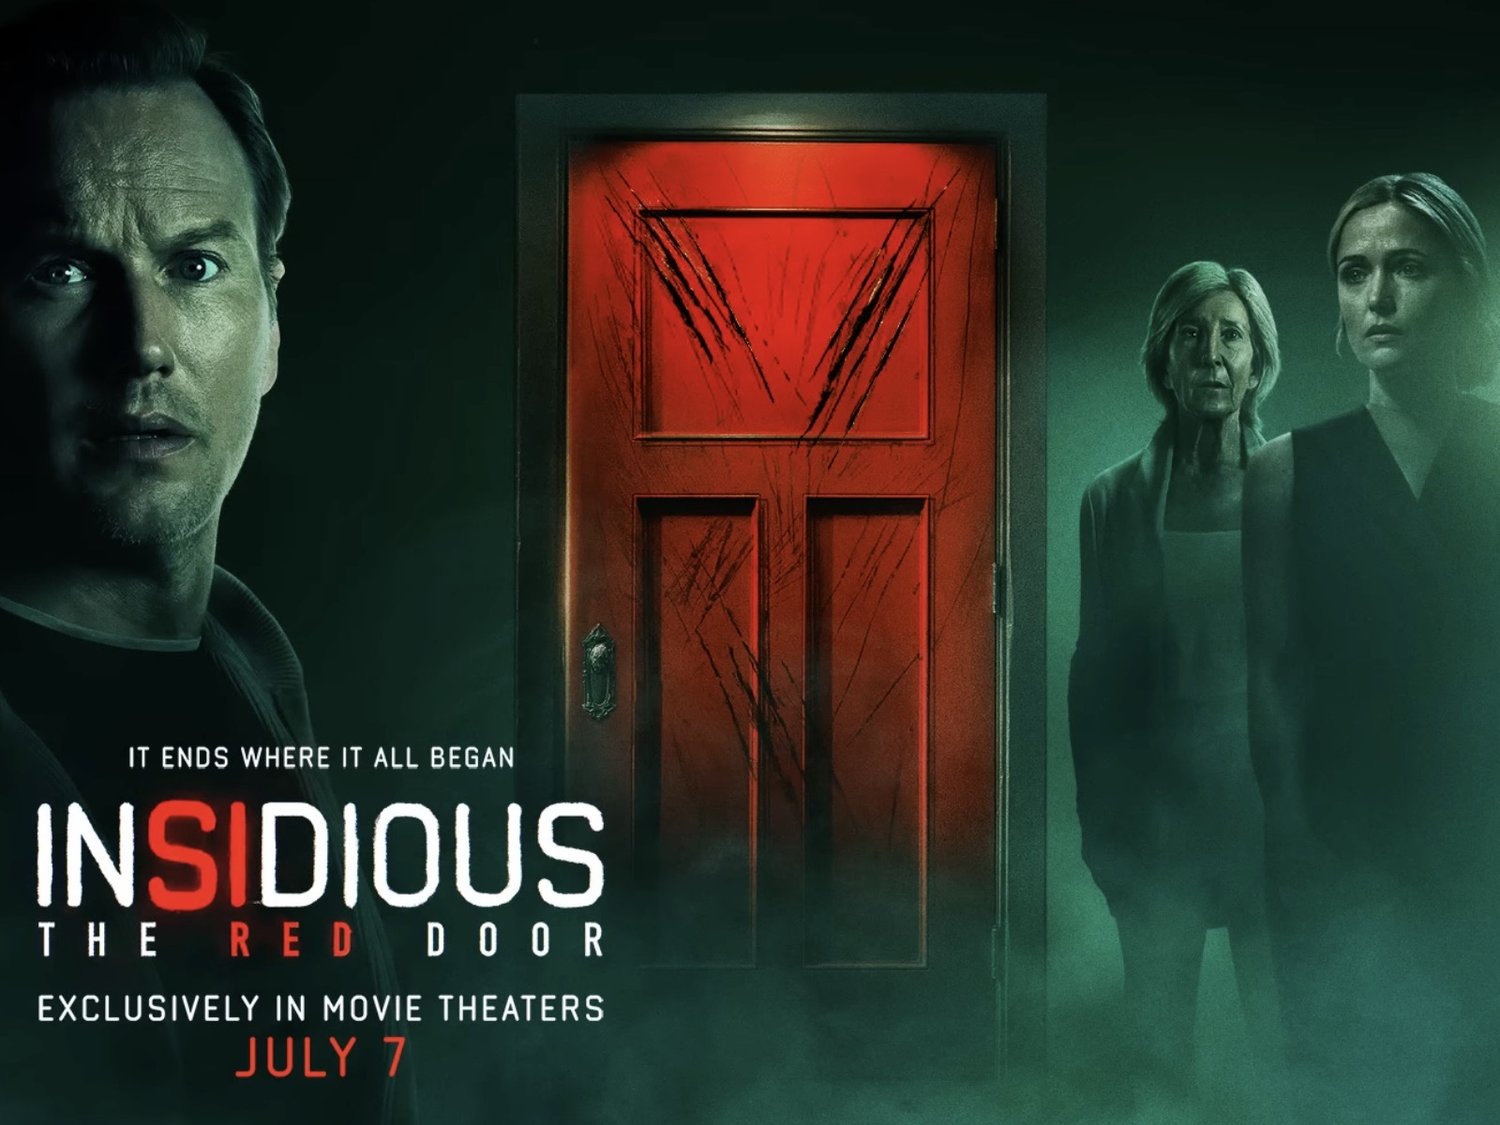 Insidious: The new 'Red Door' trailer will make you scream out loud for a Date Night